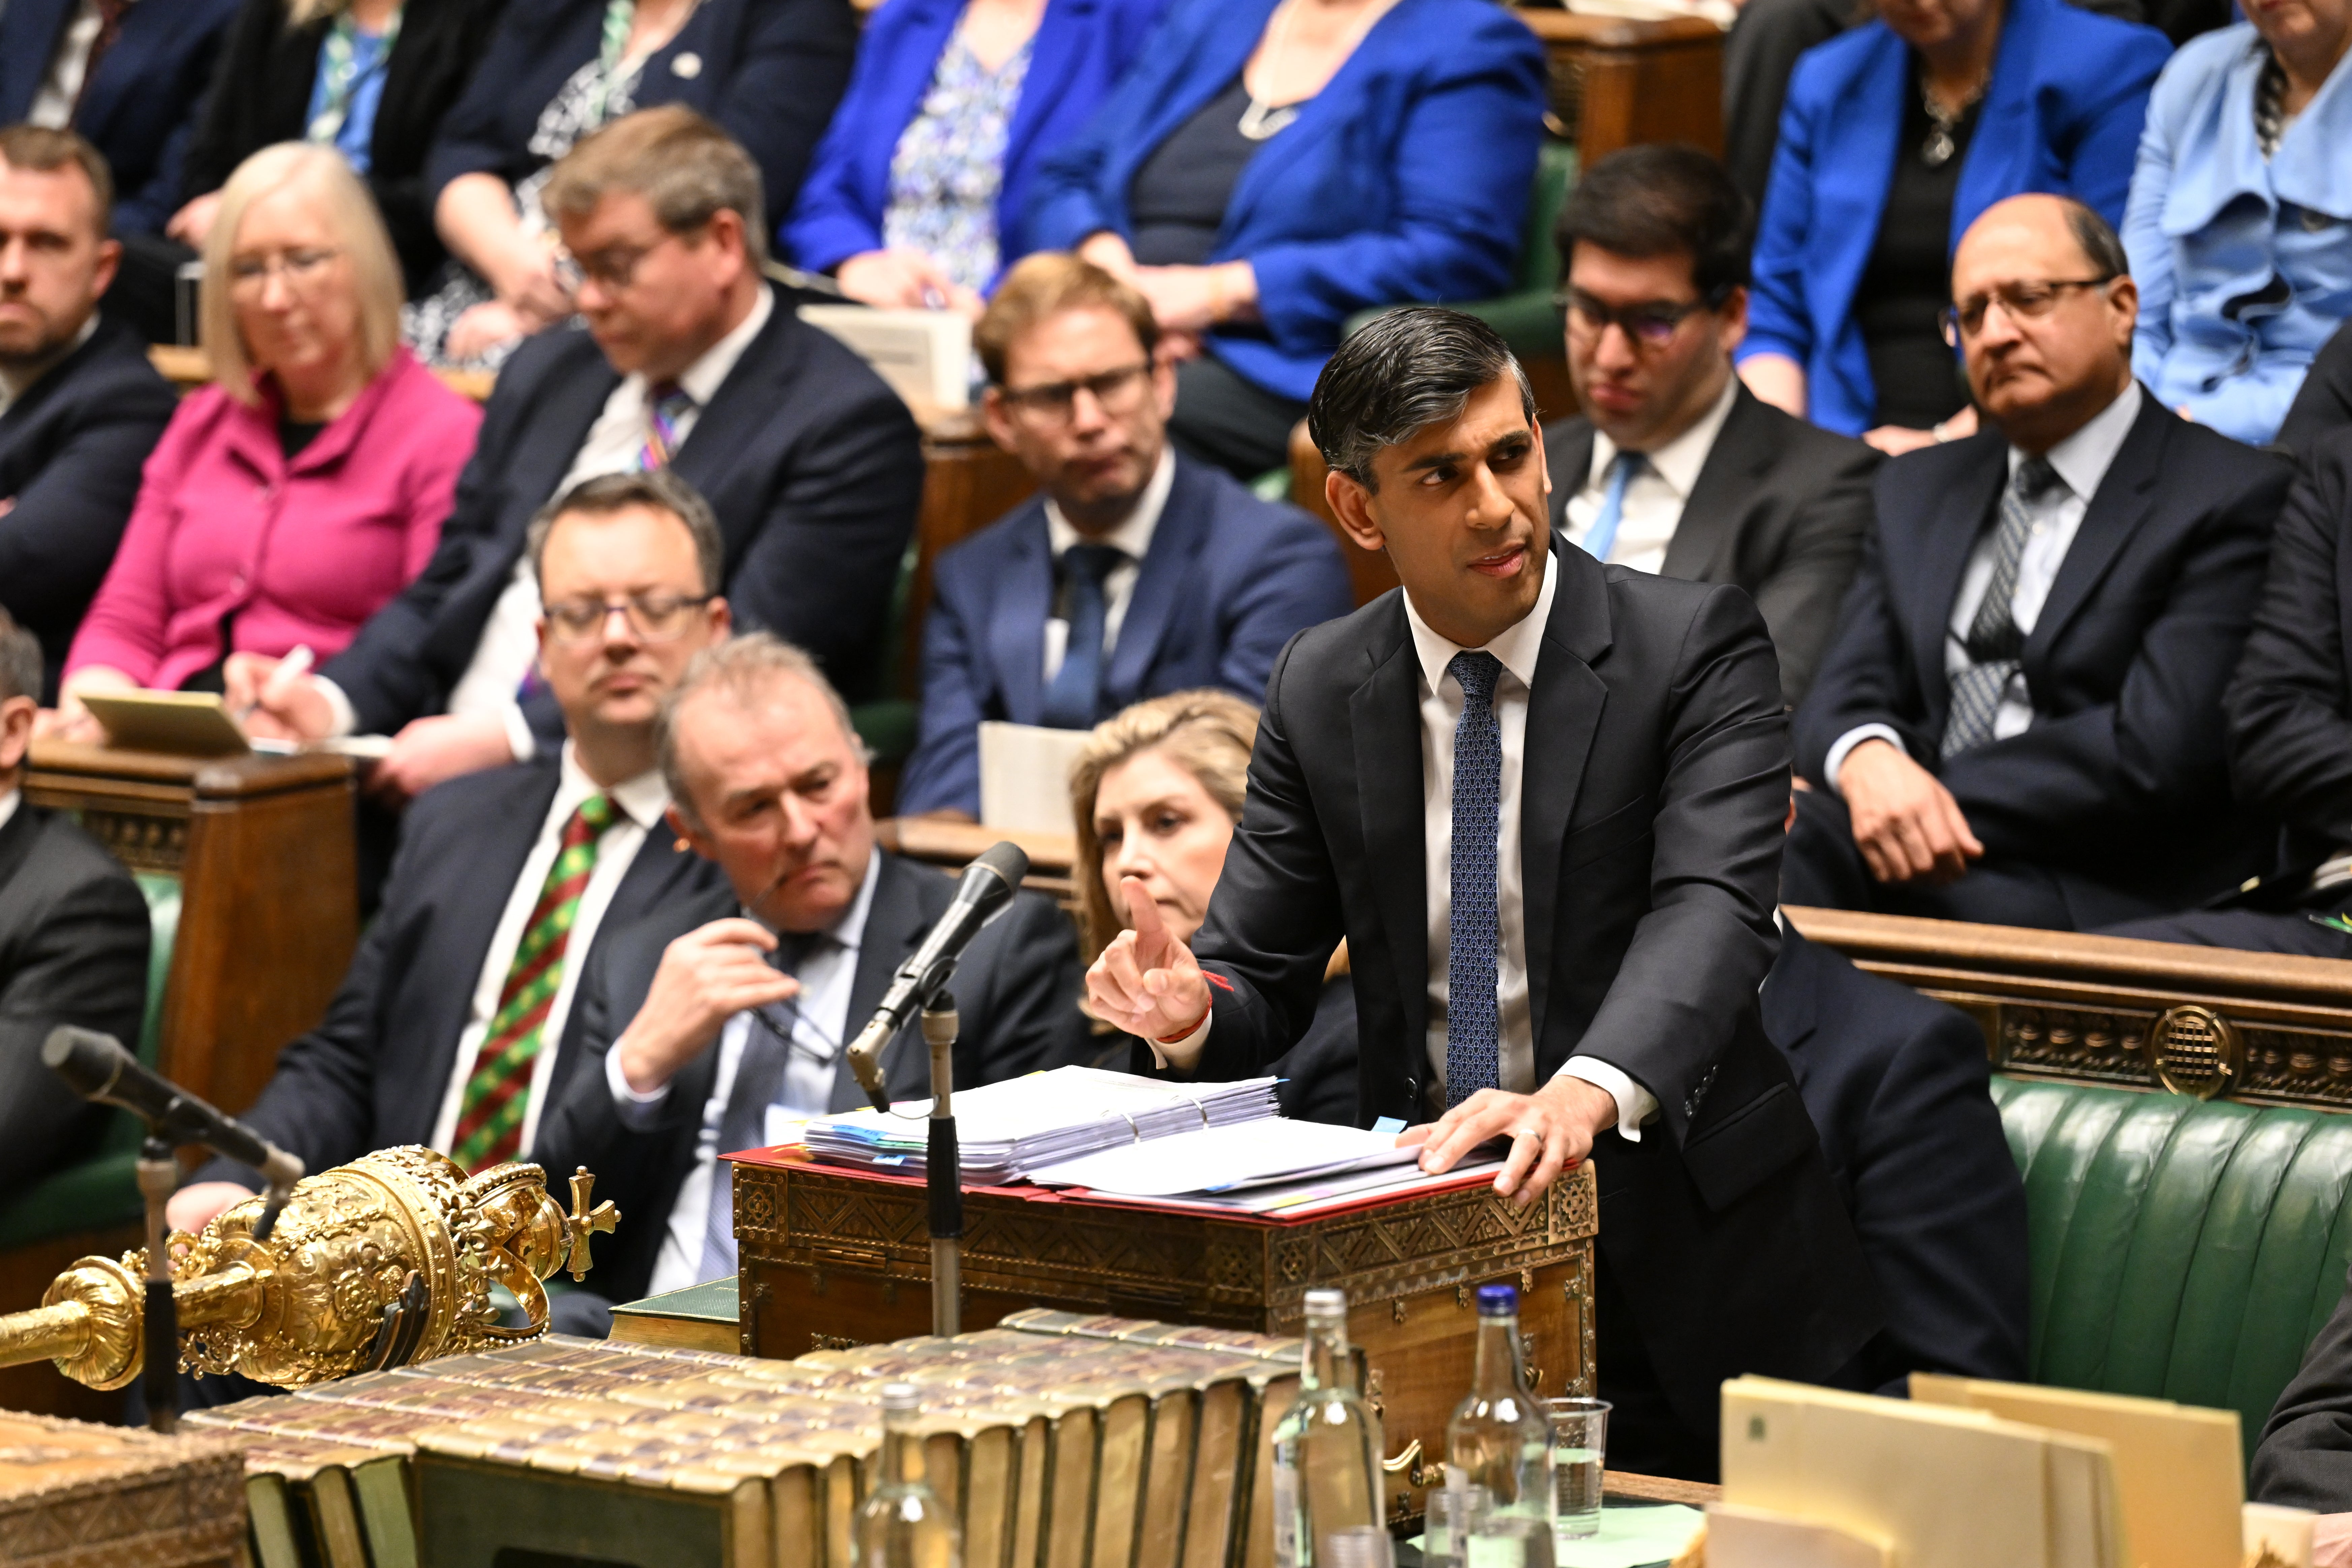 With recent polling putting their party’s popularity at a 45-year low, the chancellor and prime minister Rishi Sunak had been determined to offer a tax giveaway to the electorate